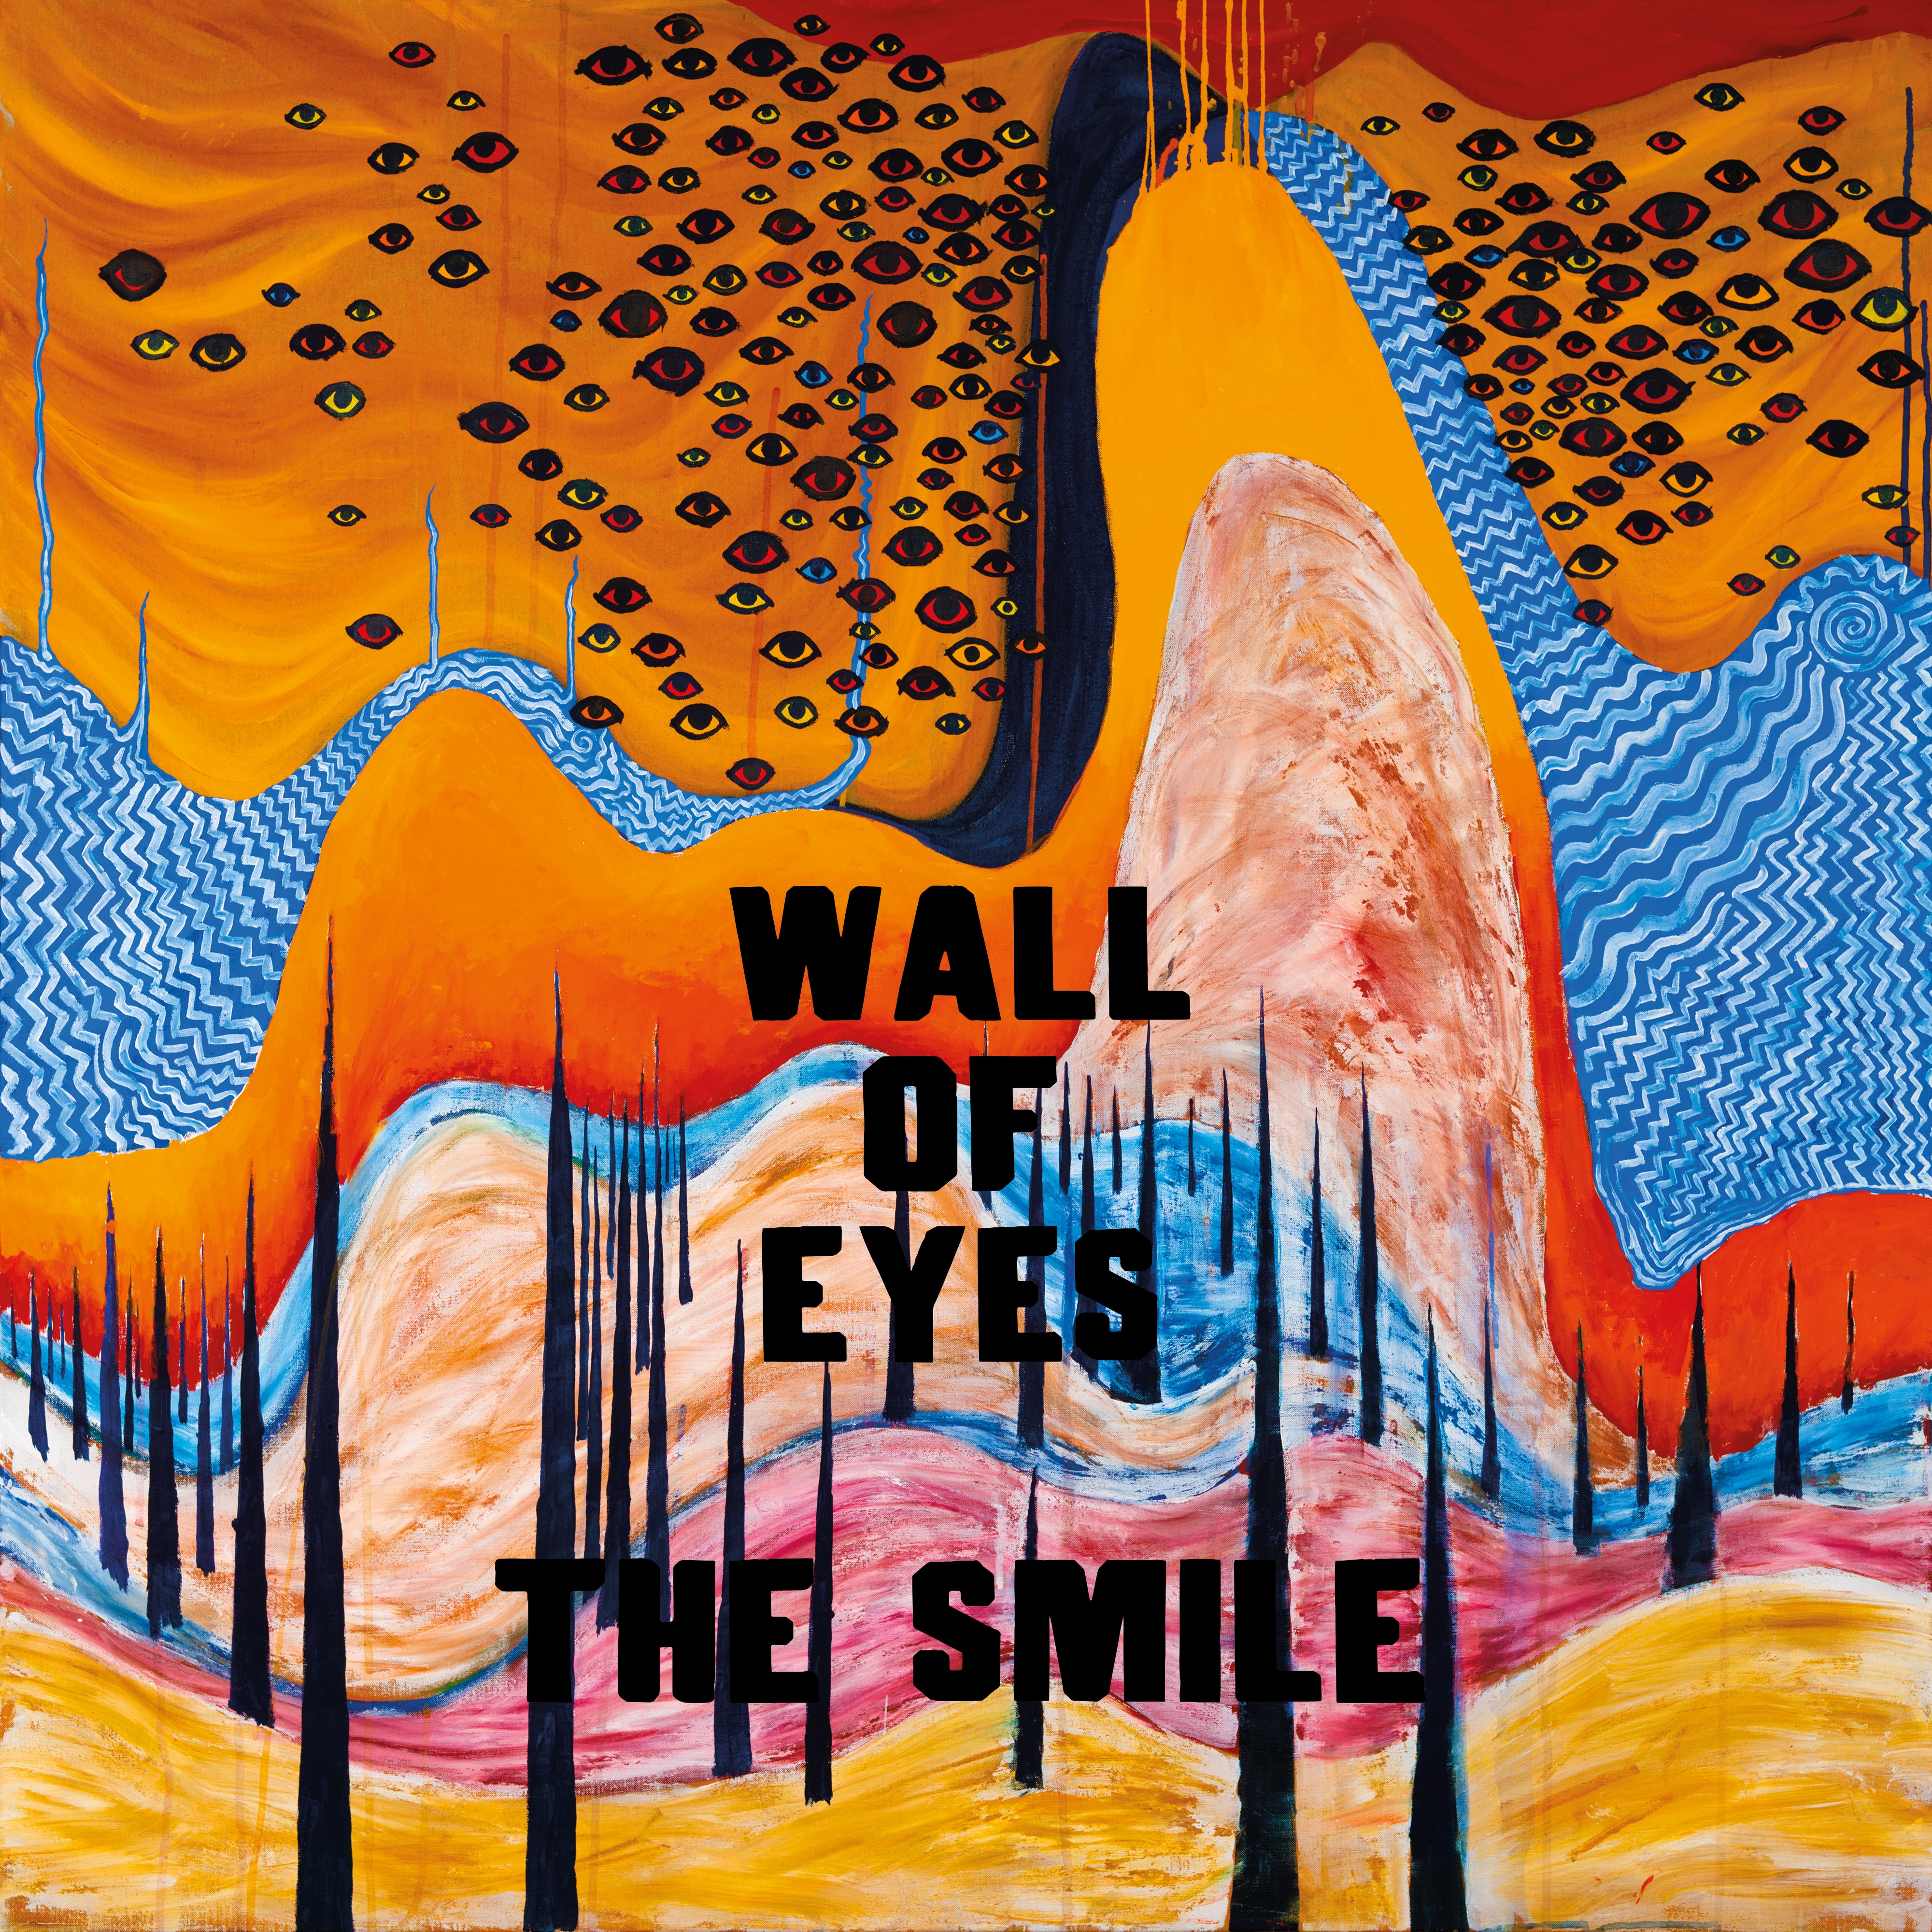 abstract painting of blue/orange/tan waves, stalagmites, eyes and text: WALL OF EYES THE SMILE